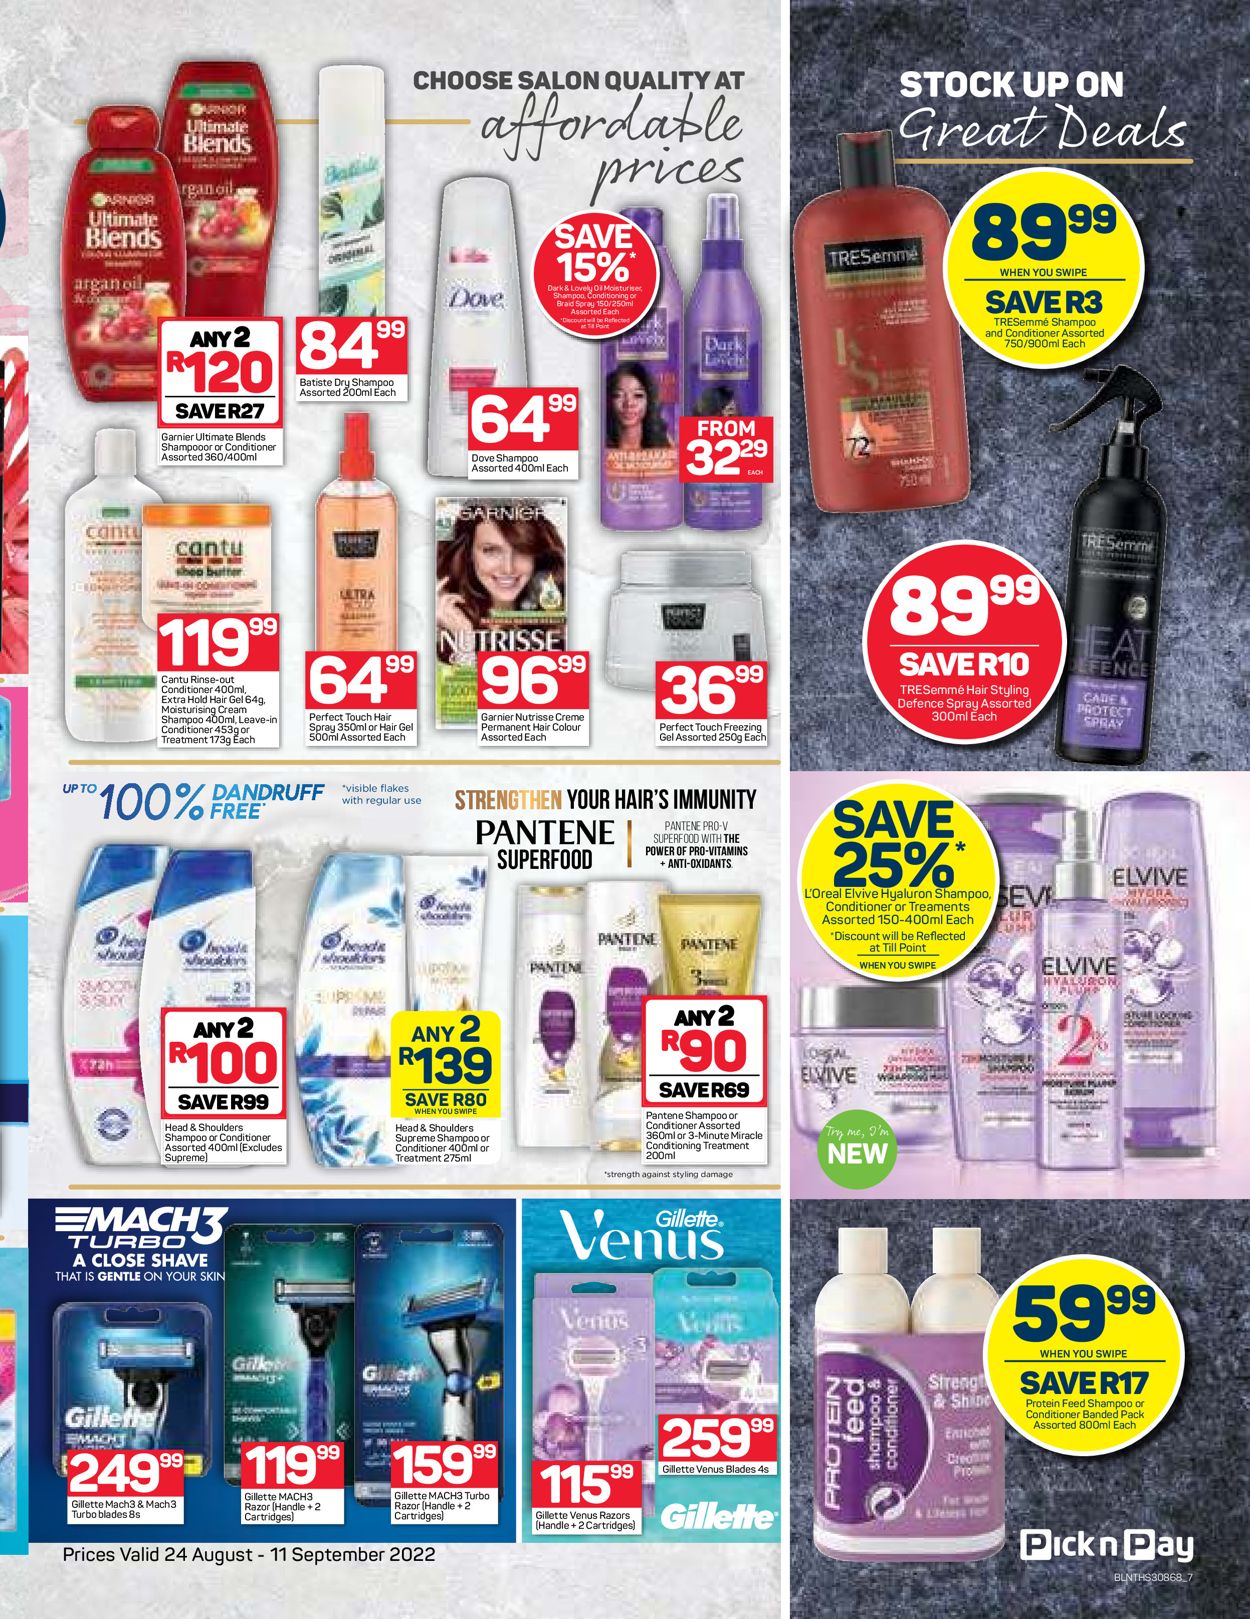 Pick n Pay Catalogue - 2022/08/24-2022/09/11 (Page 7)